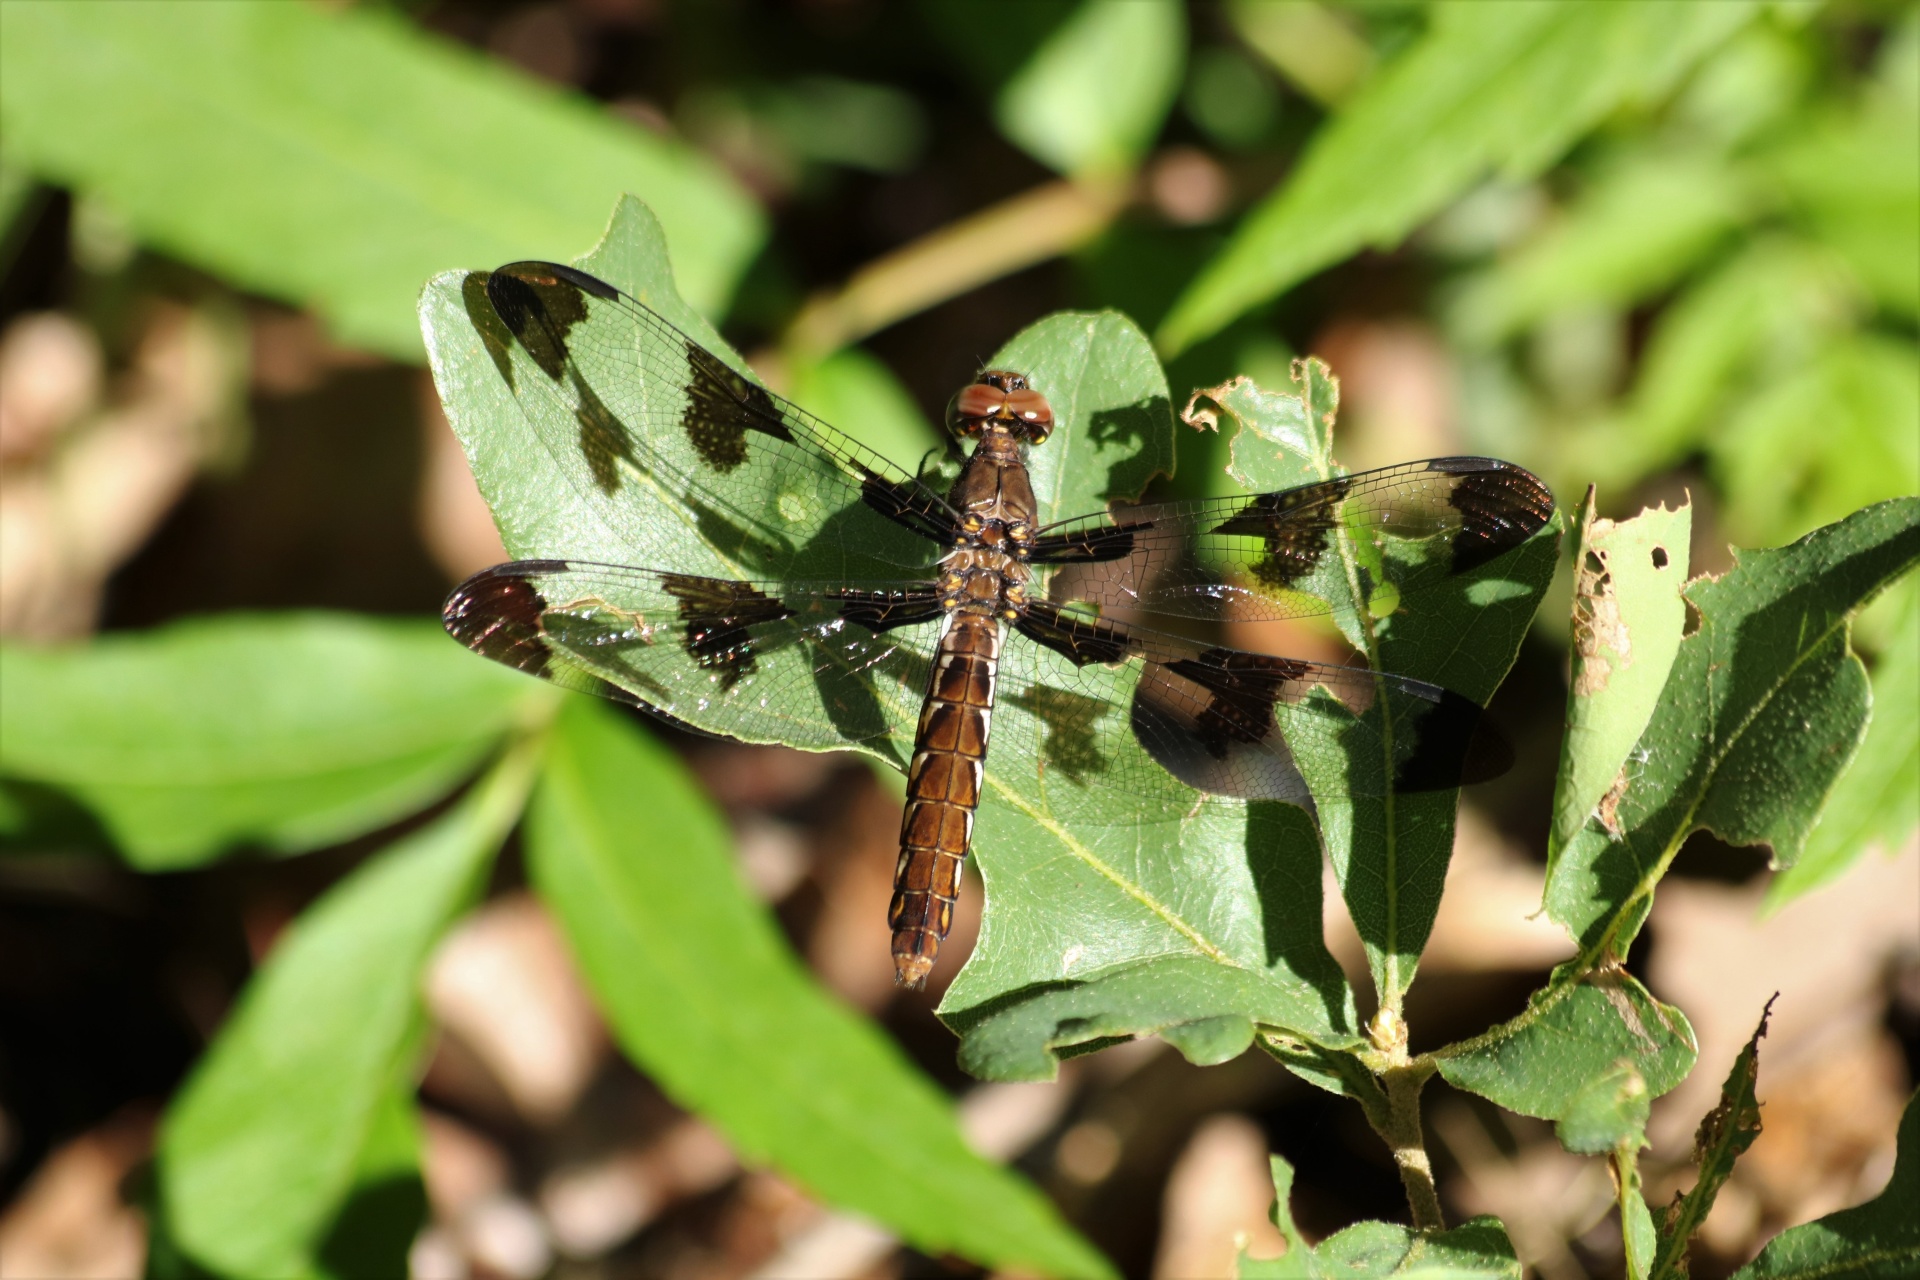 Close-up of a banded pennant dragonfly on a green leaf.